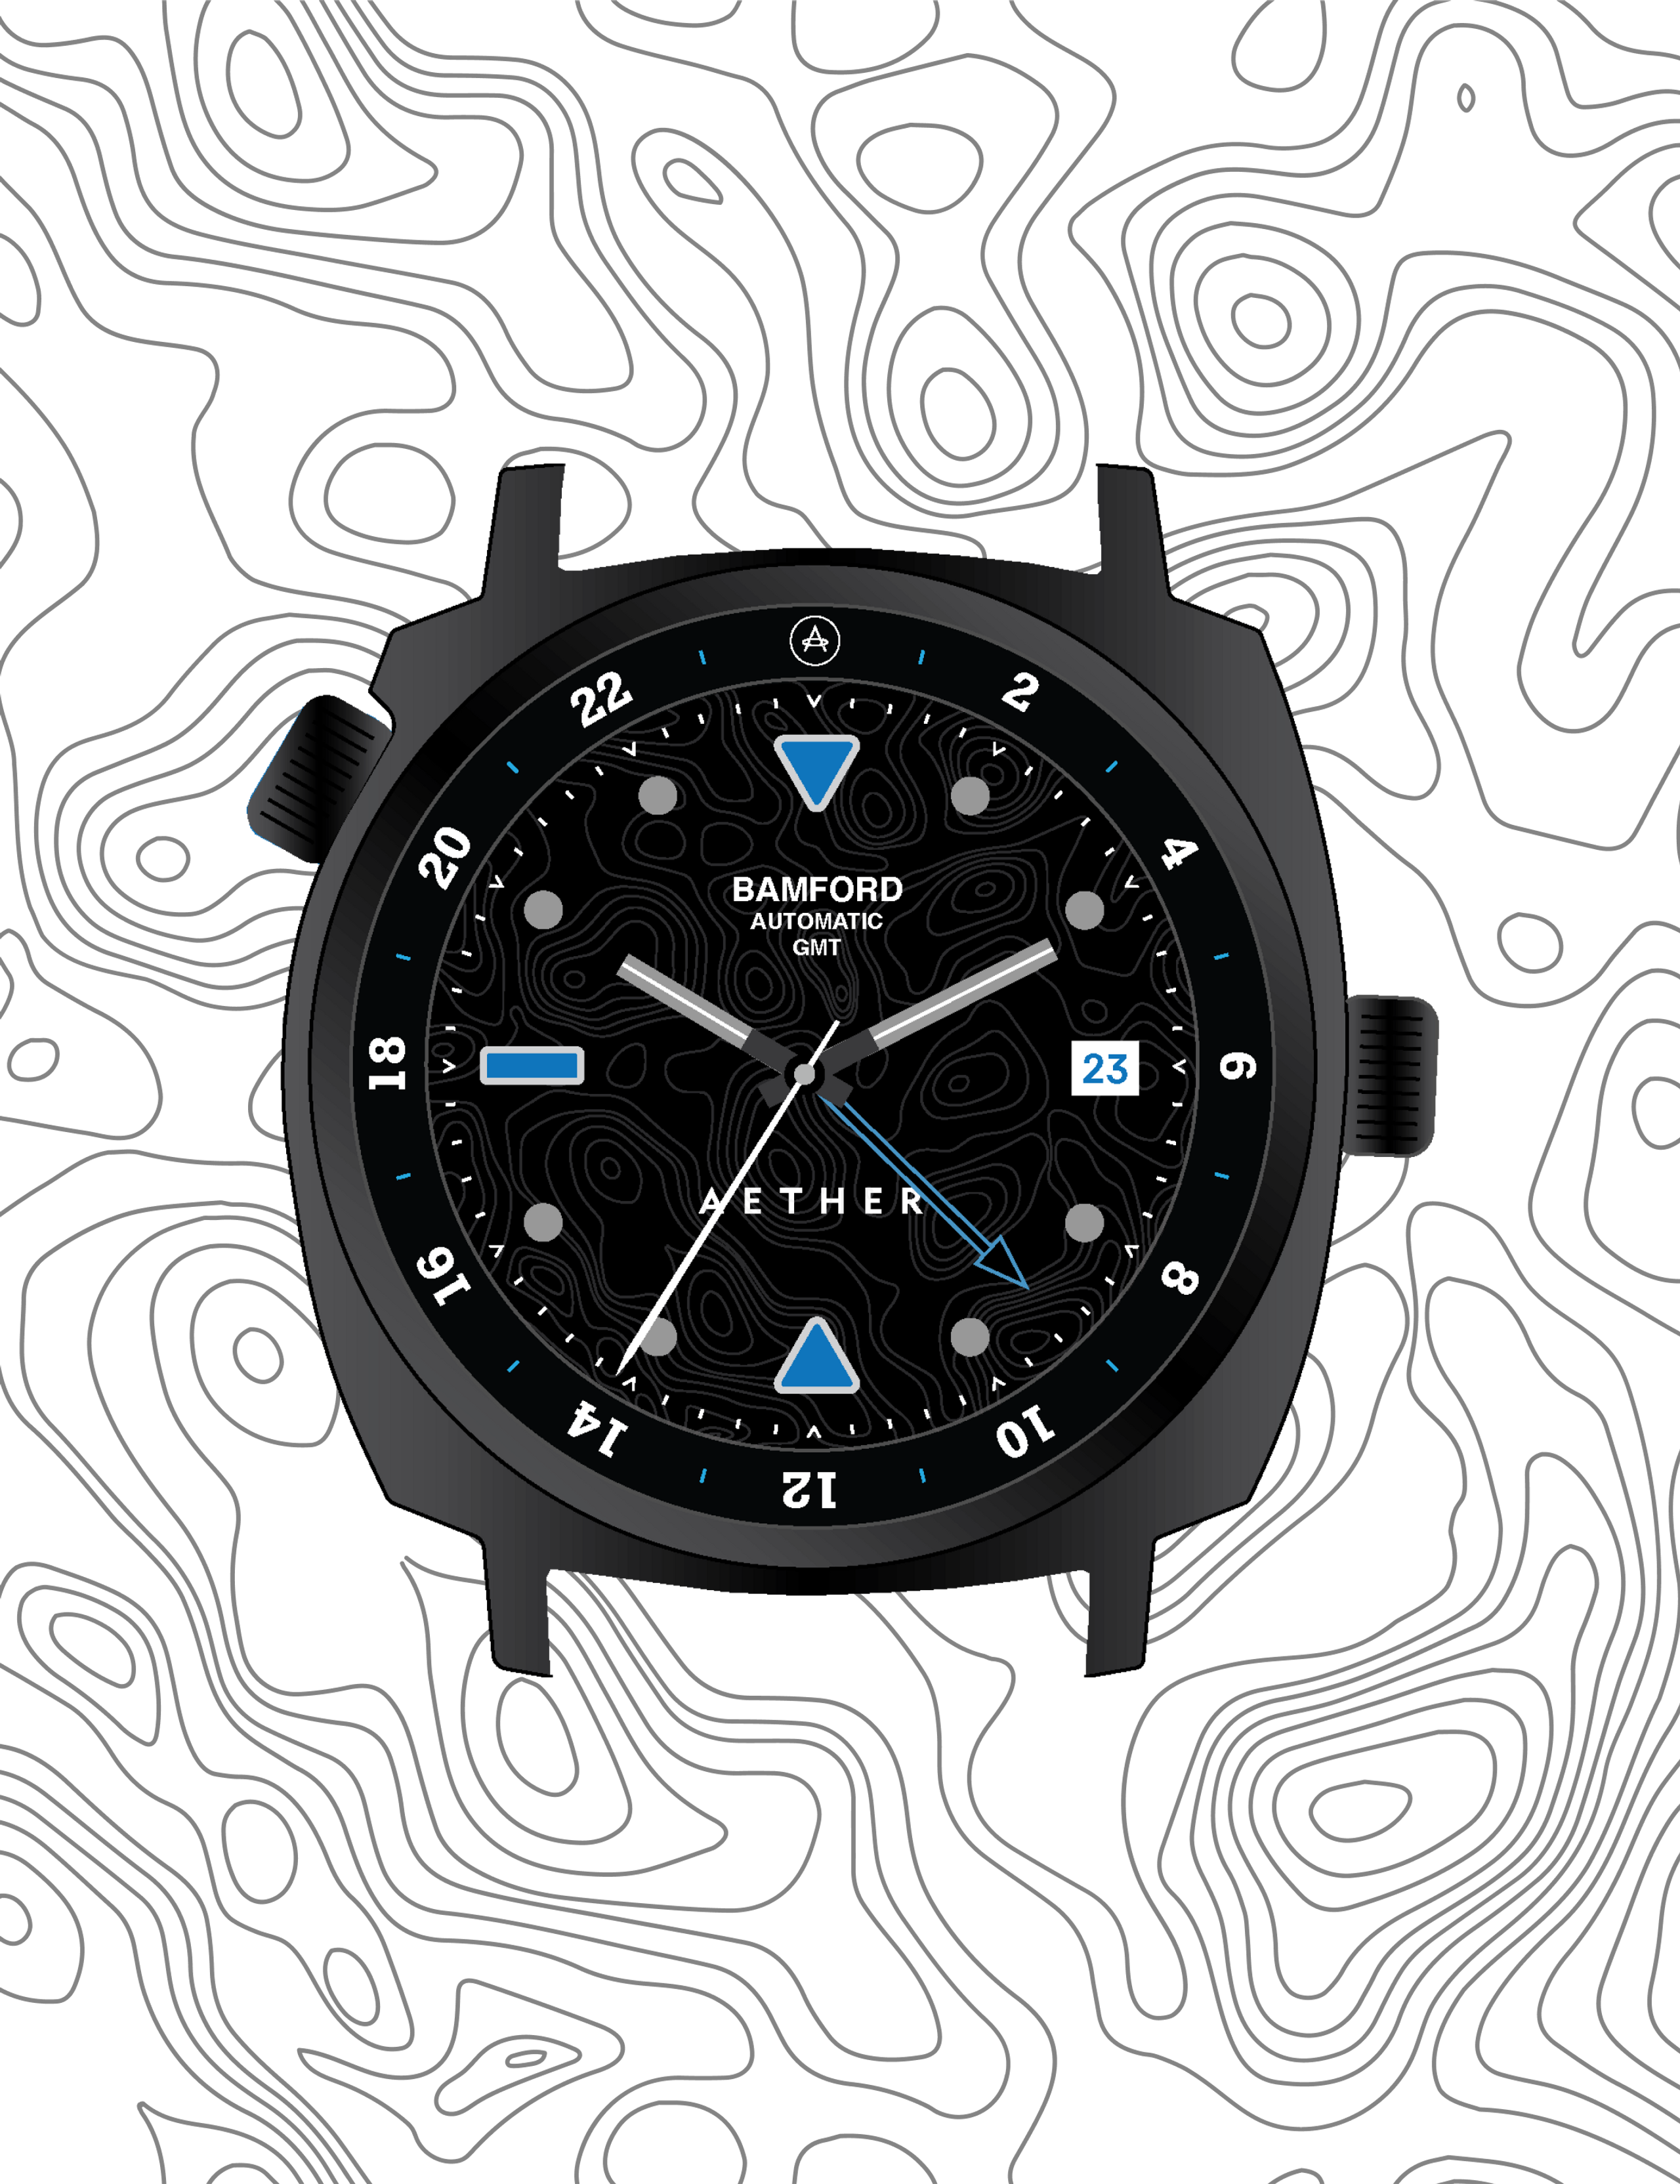 Final watch face design with topographic artwork in the background